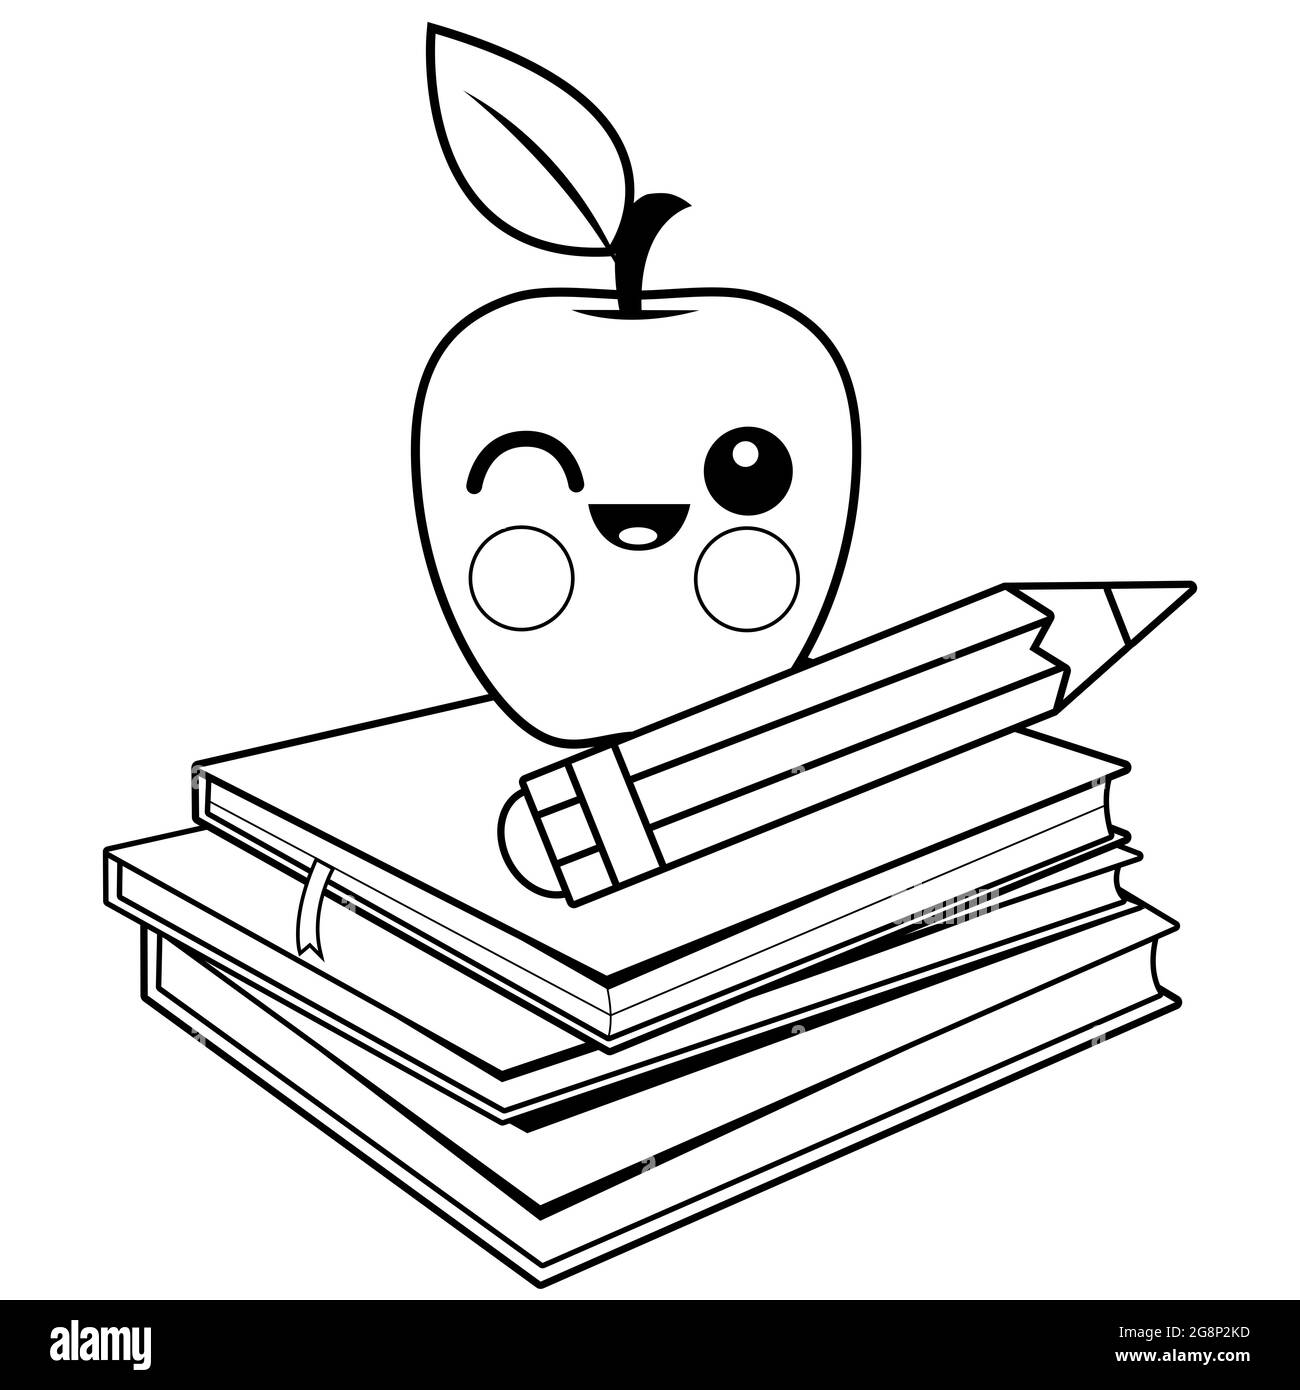 Apple, books and pencil. Black and white coloring book page. Stock Photo